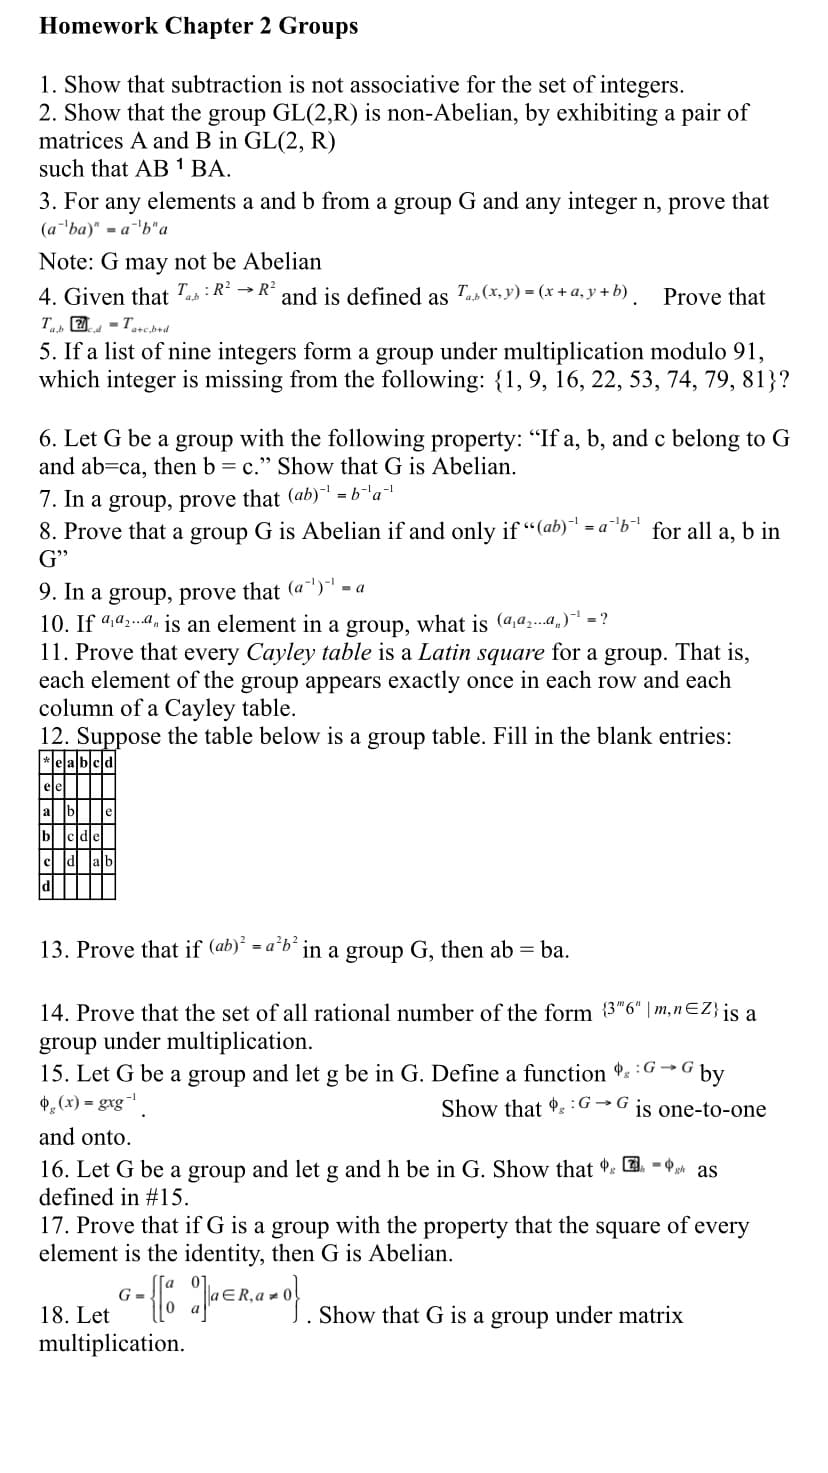 10. If 4,42..a, is an element in a group, what is (4,az..a,) = ?
